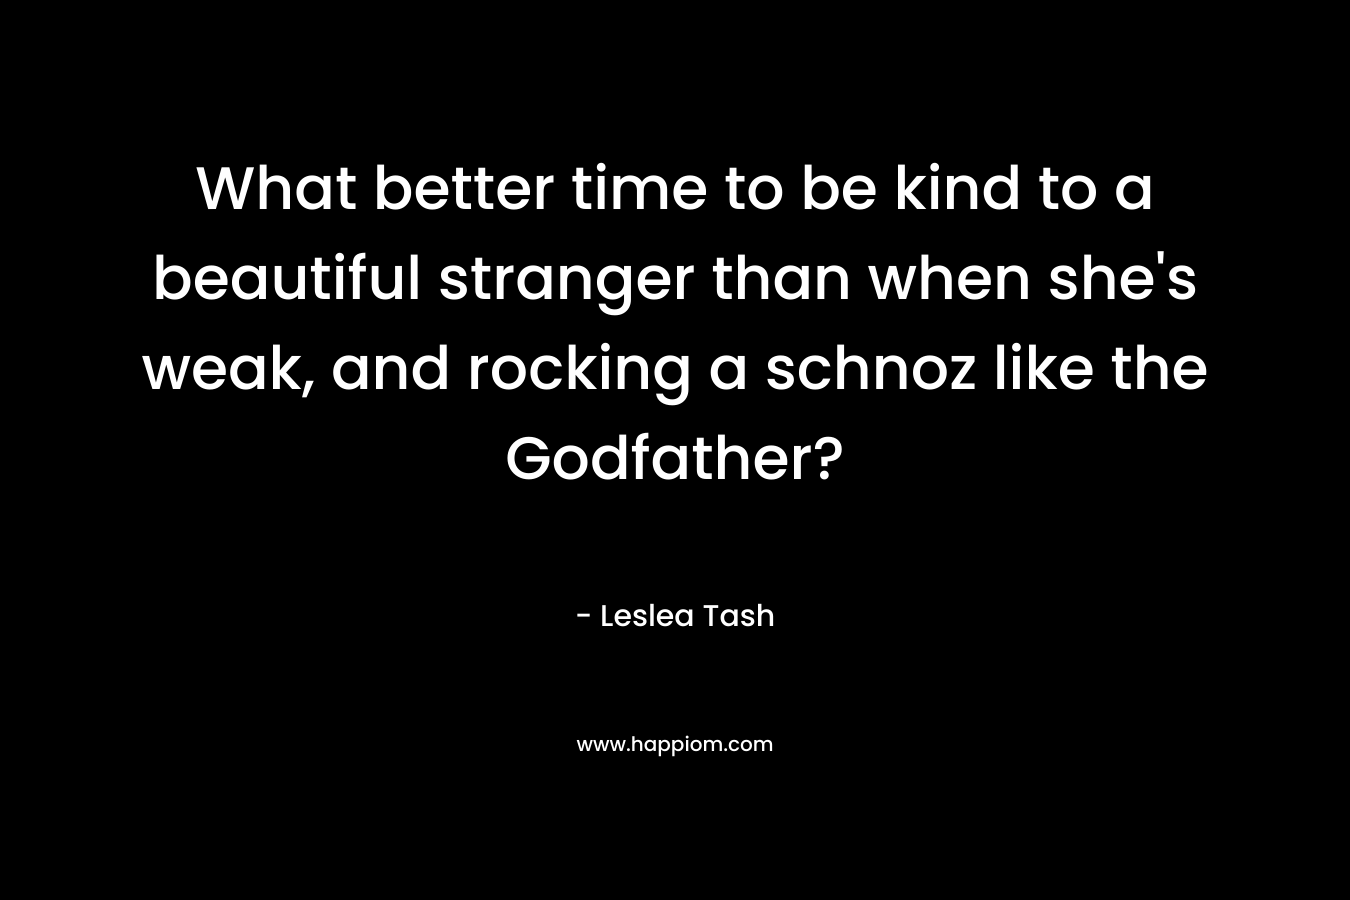 What better time to be kind to a beautiful stranger than when she’s weak, and rocking a schnoz like the Godfather? – Leslea Tash